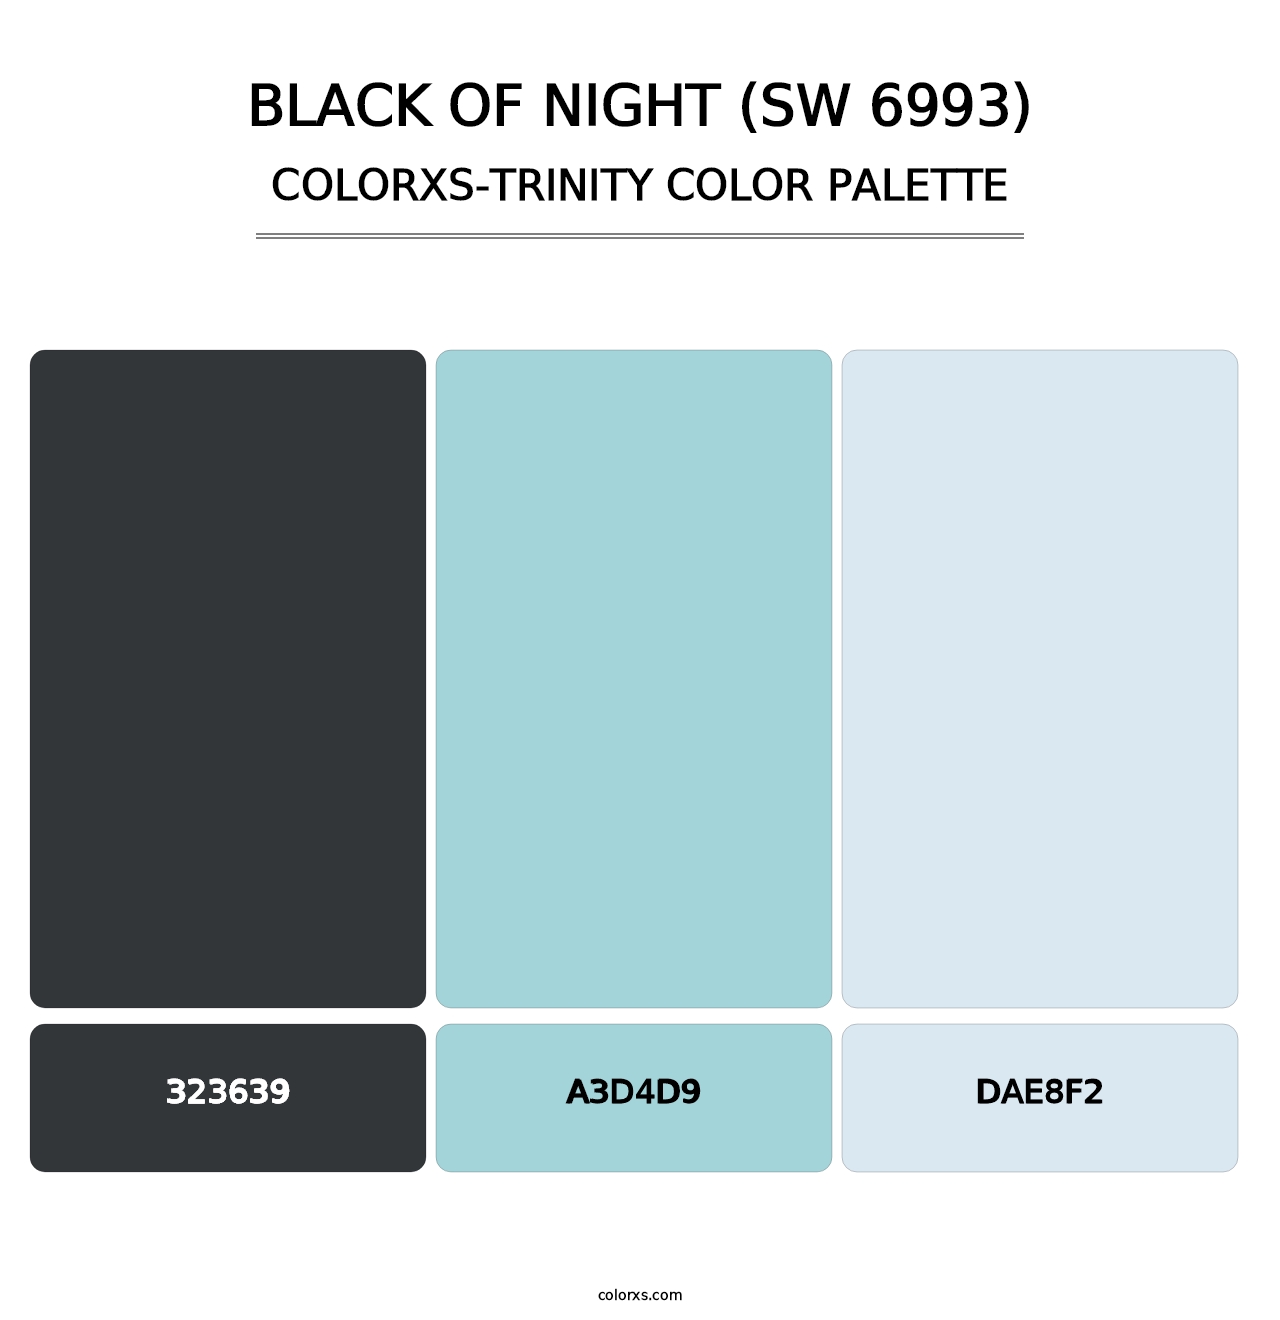 Black of Night (SW 6993) - Colorxs Trinity Palette